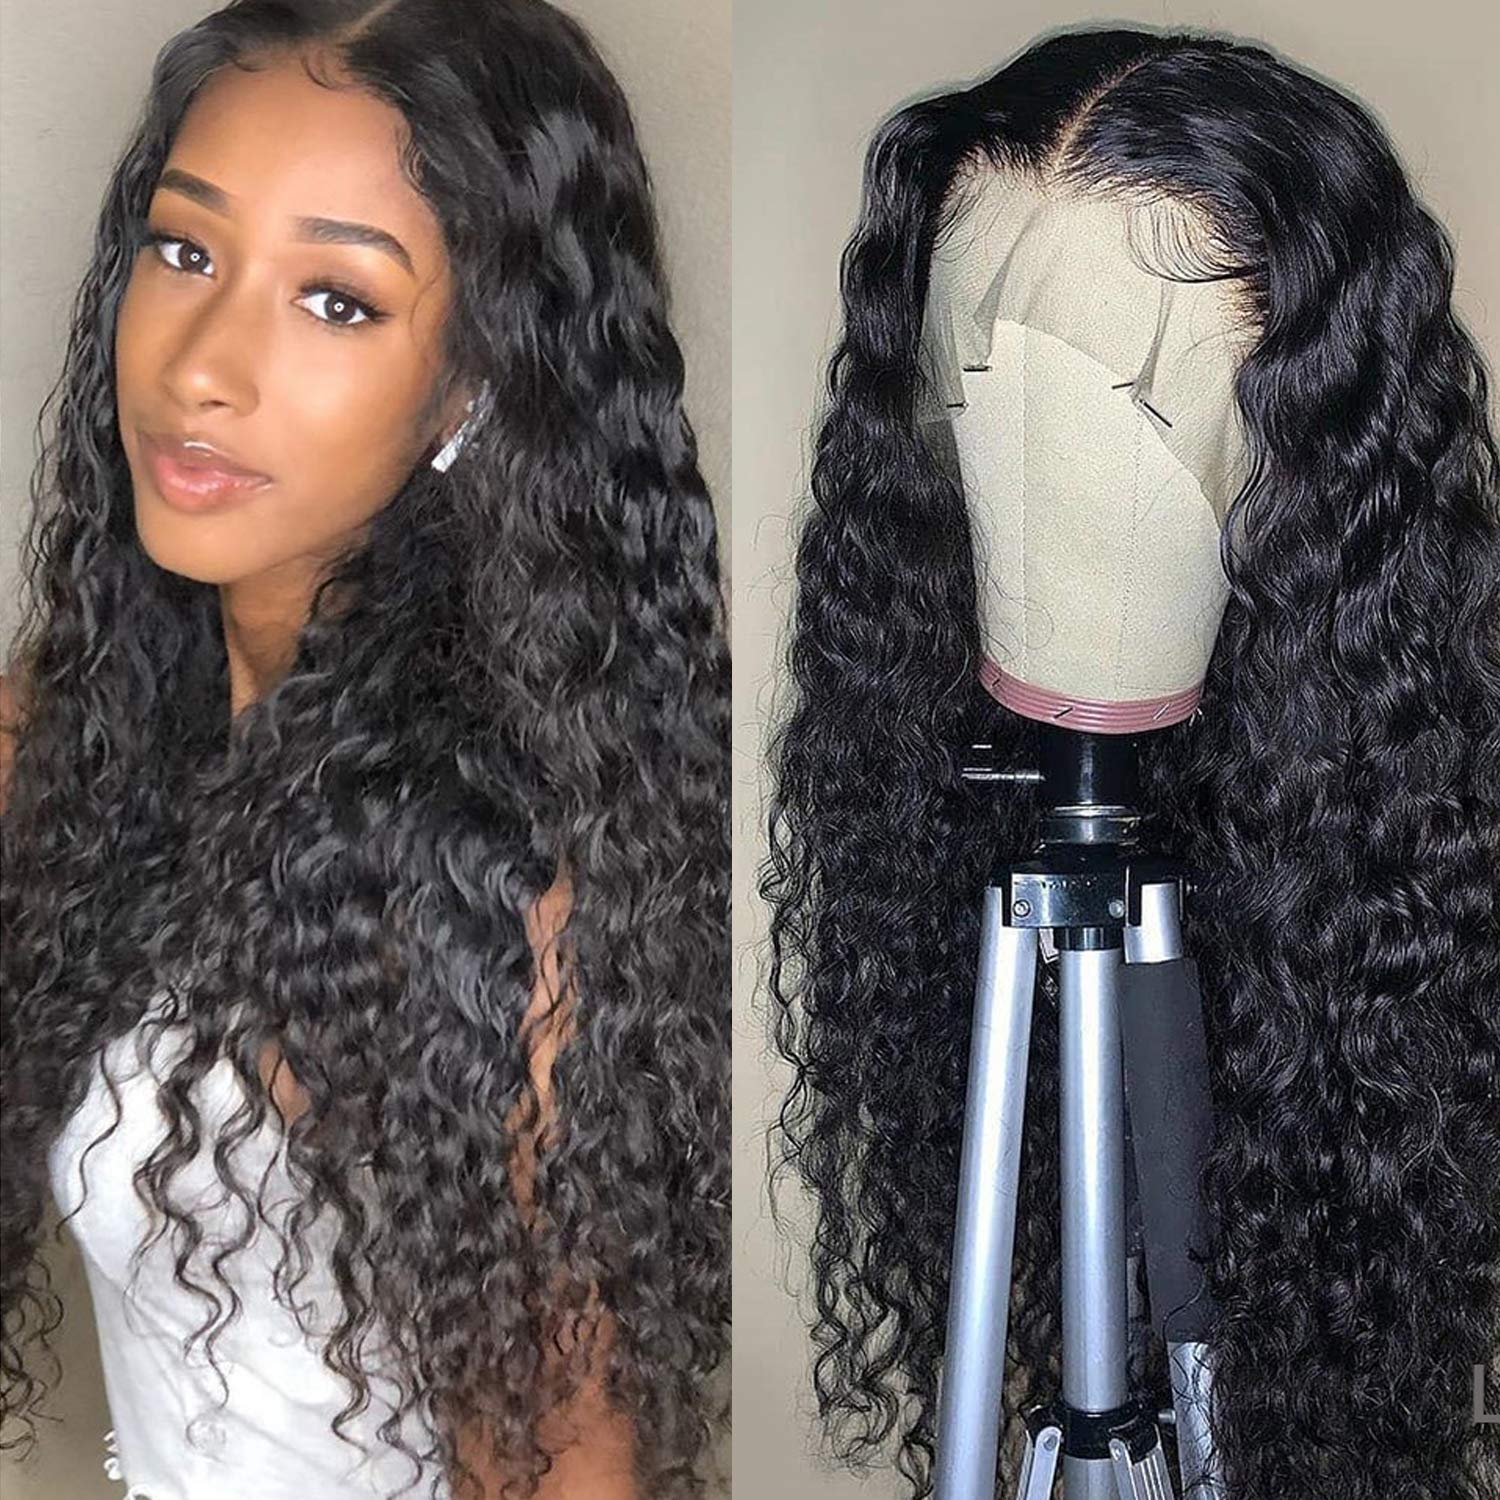 Water Wave Curly Brazilian Hair High Density Lace Front Wig, Pre-plucked w/ Baby Hair Human Hair Wigs Beautiful Curl